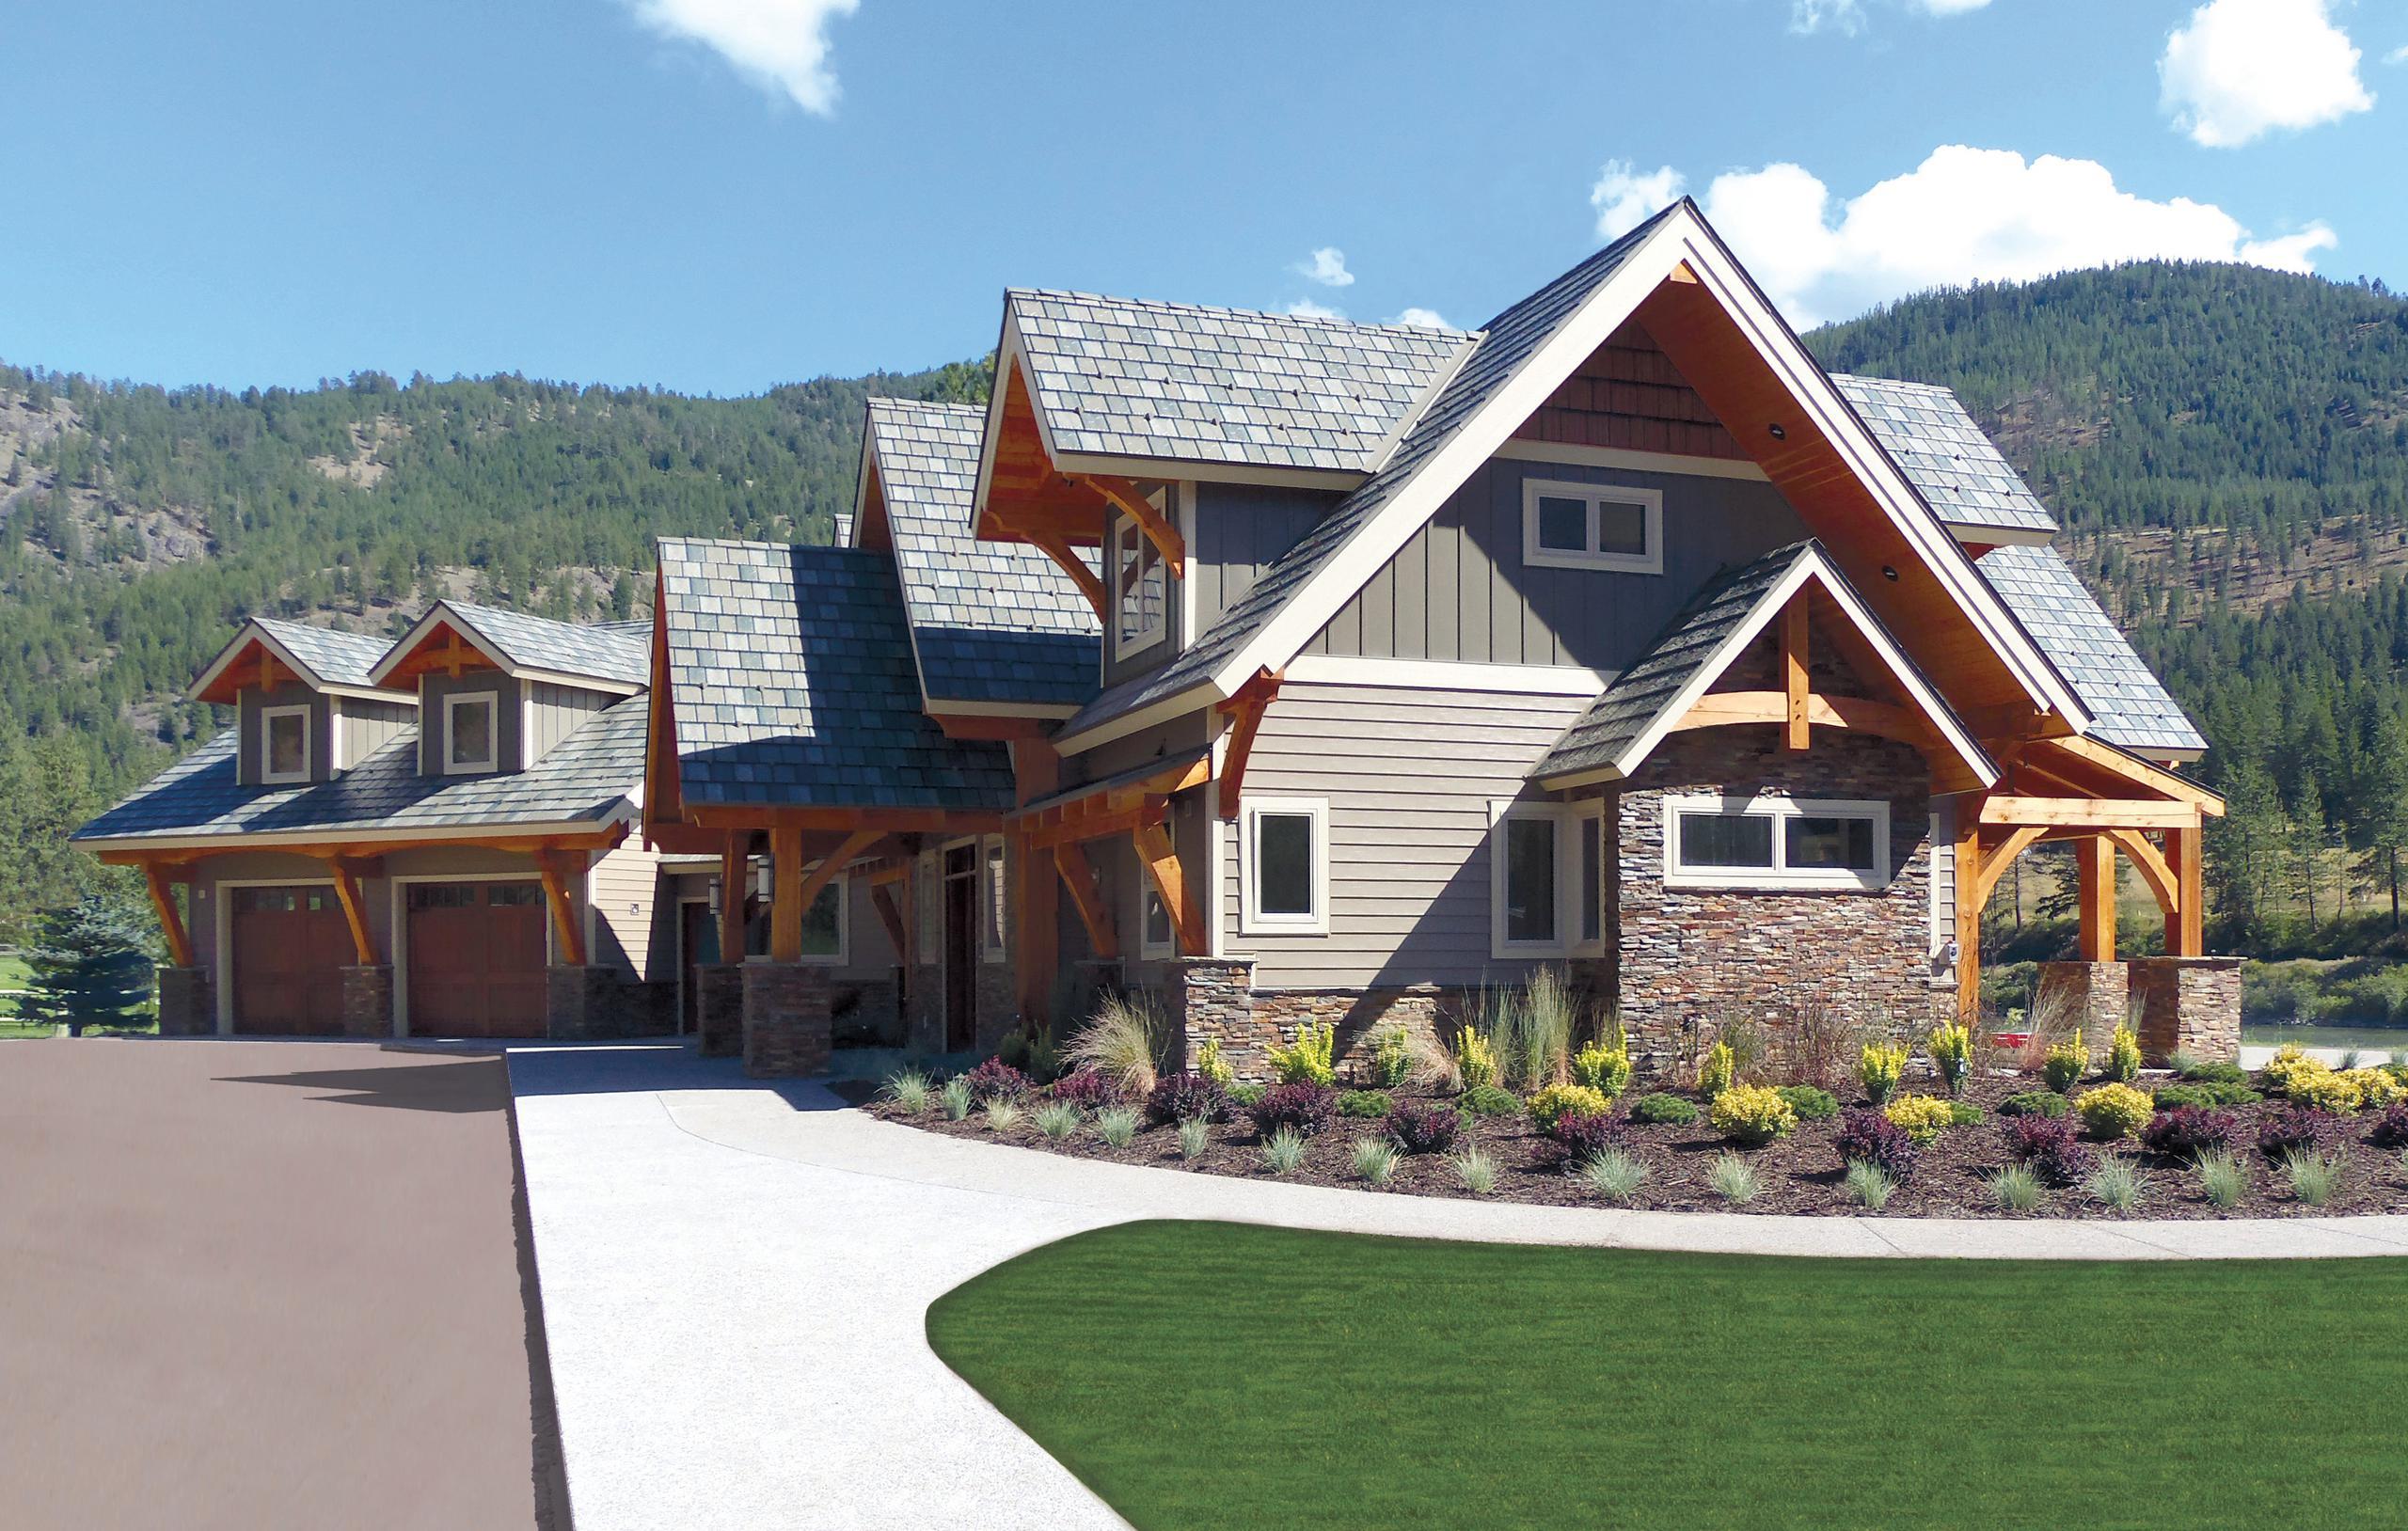 Located in the mountains of Montana, this home showcases the beauty of EDCO's teel Arrowline Slate Roofing in T-Tone Blend, Vertical 12" Board and Batten in T-Tone and Single 6" Traditional Lap Siding. EDCO's color-coordinated products, from top to bottom, offer homeowners and professionals versatility when it comes to designing a stunning home